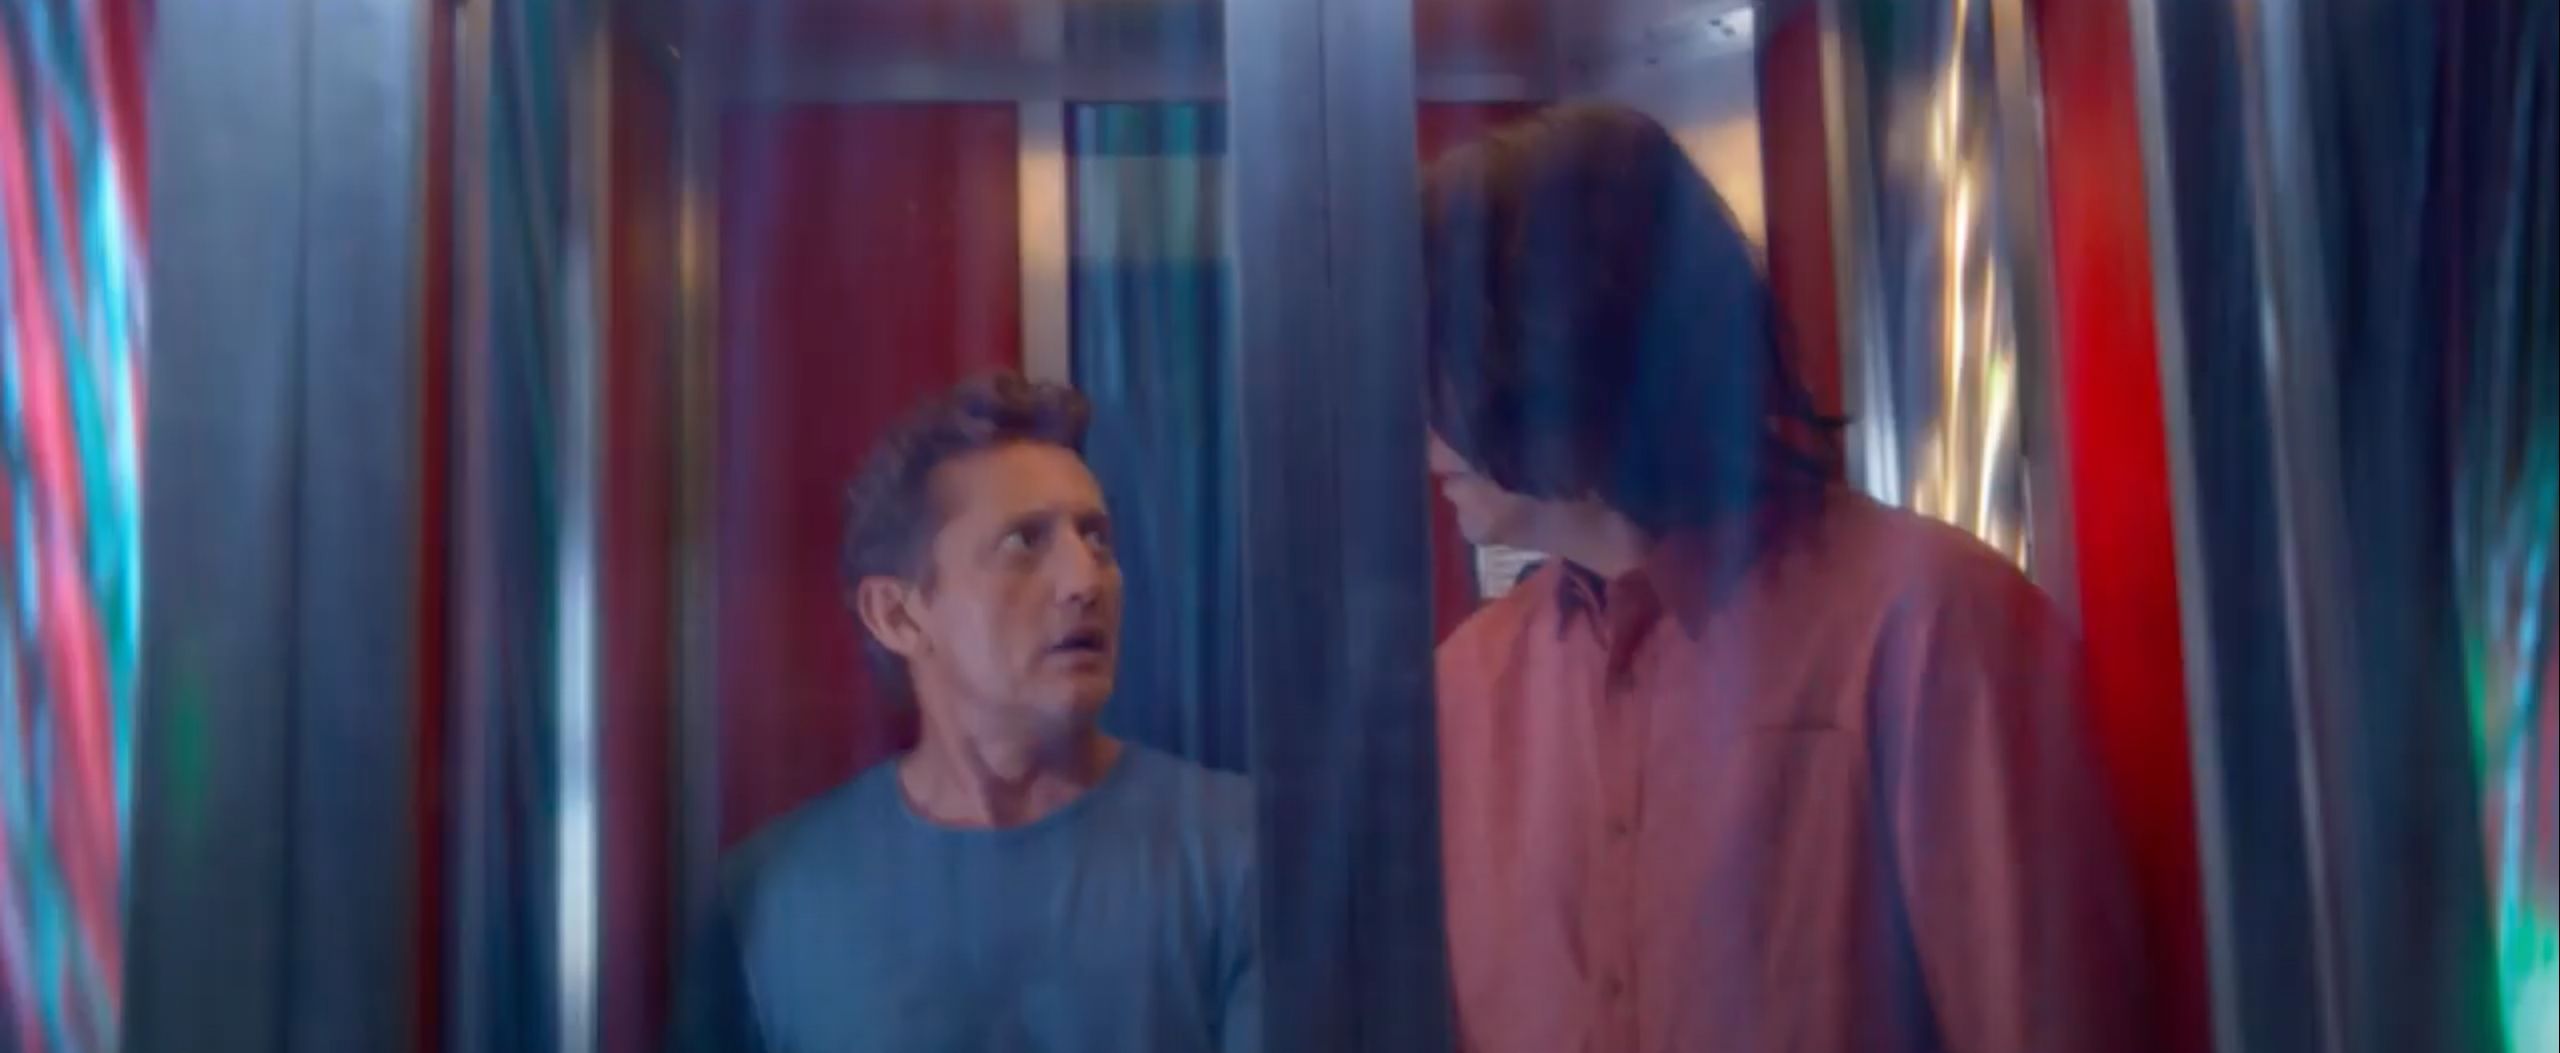 Bill and Ted Face The Music Trailer Image #24